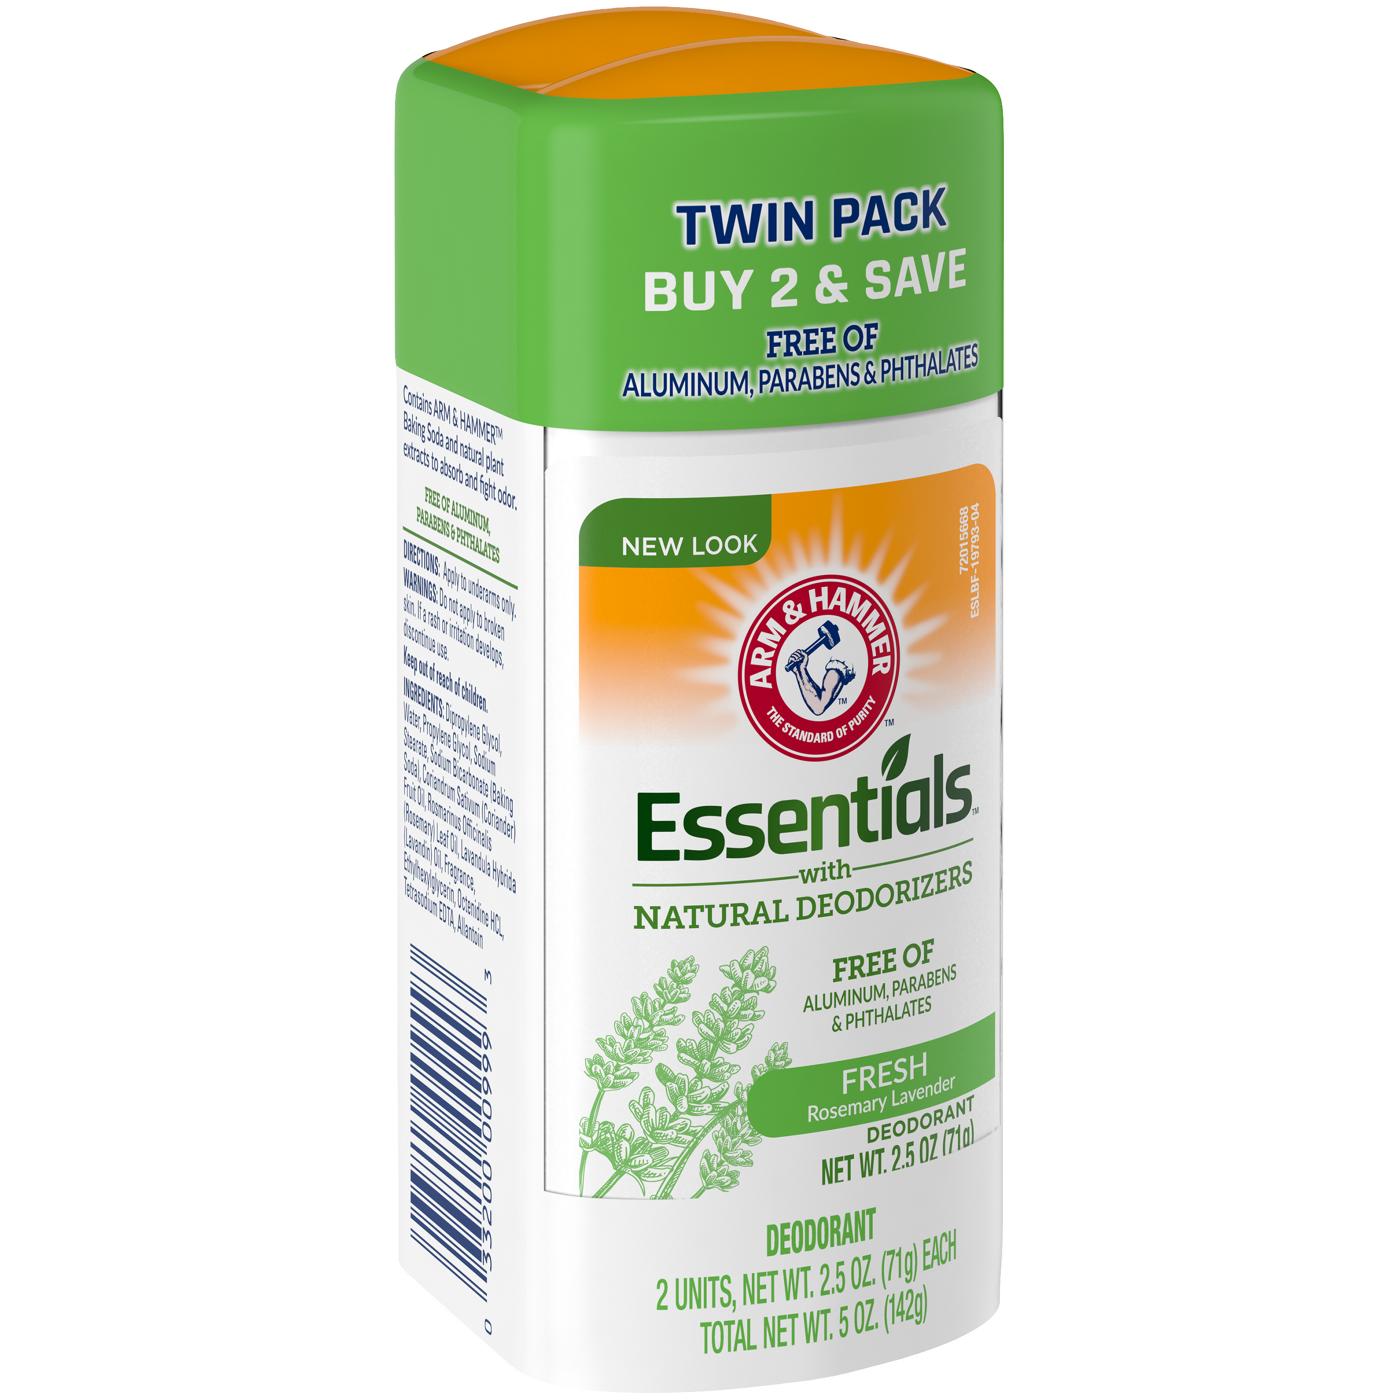 Arm & Hammer Essentials Deodorant Rosemary Lavender Twin Pack; image 4 of 4